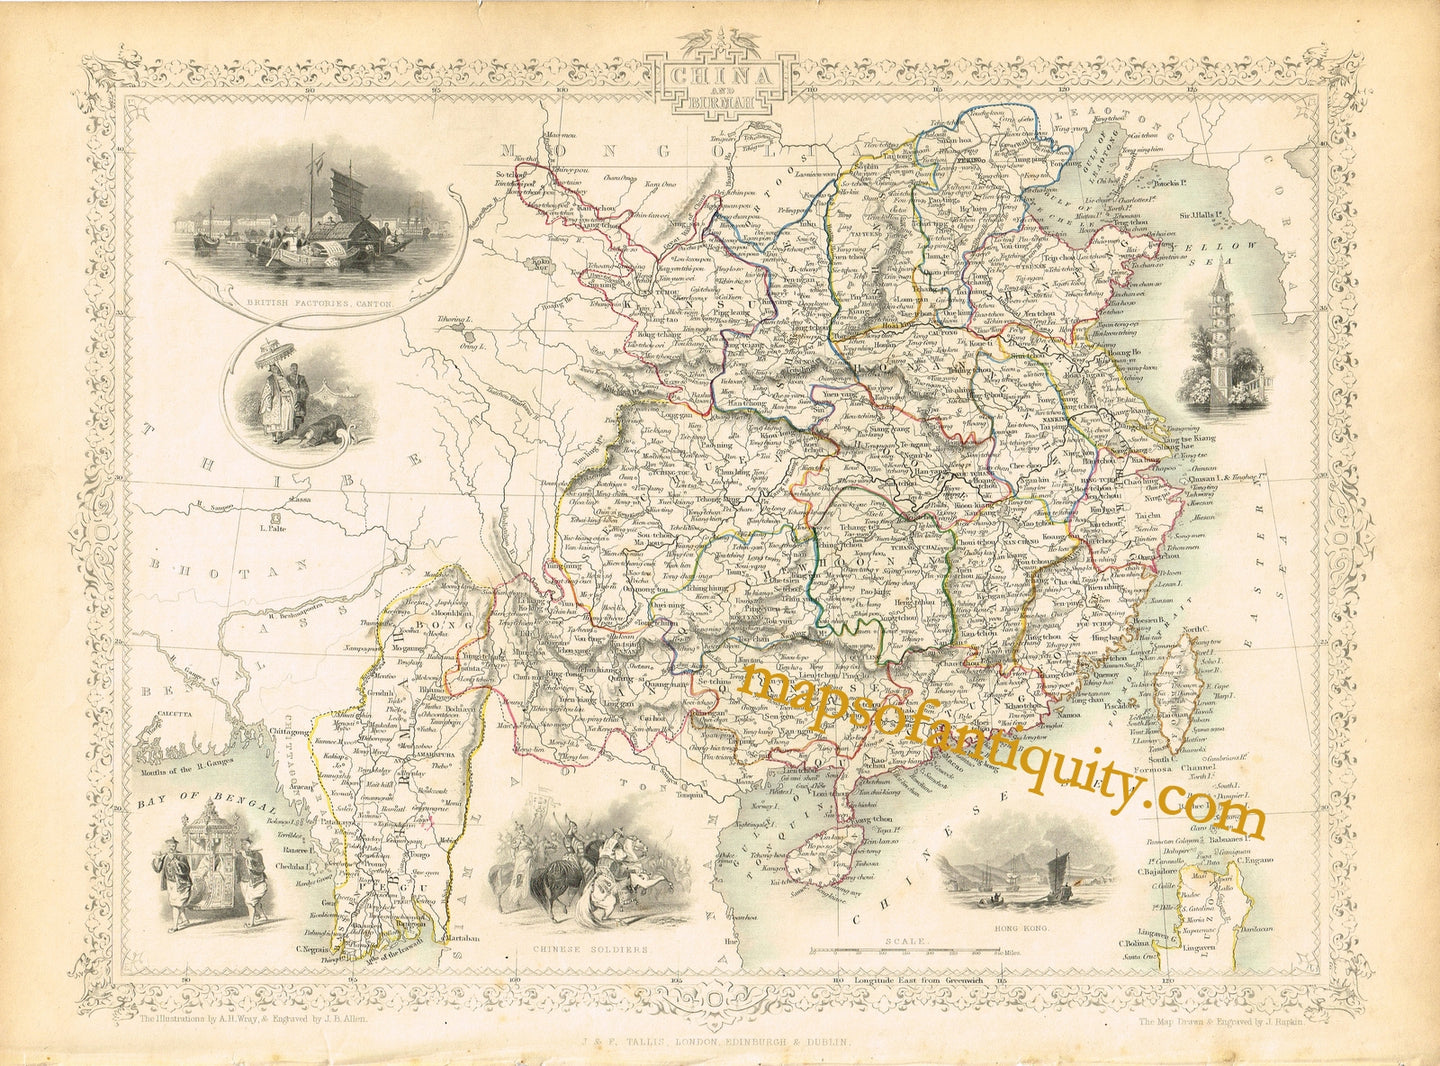 Engraved-antique-map-China-and-Burmah-**********-Asia-China-and-Japan-1851-Tallis-Maps-Of-Antiquity